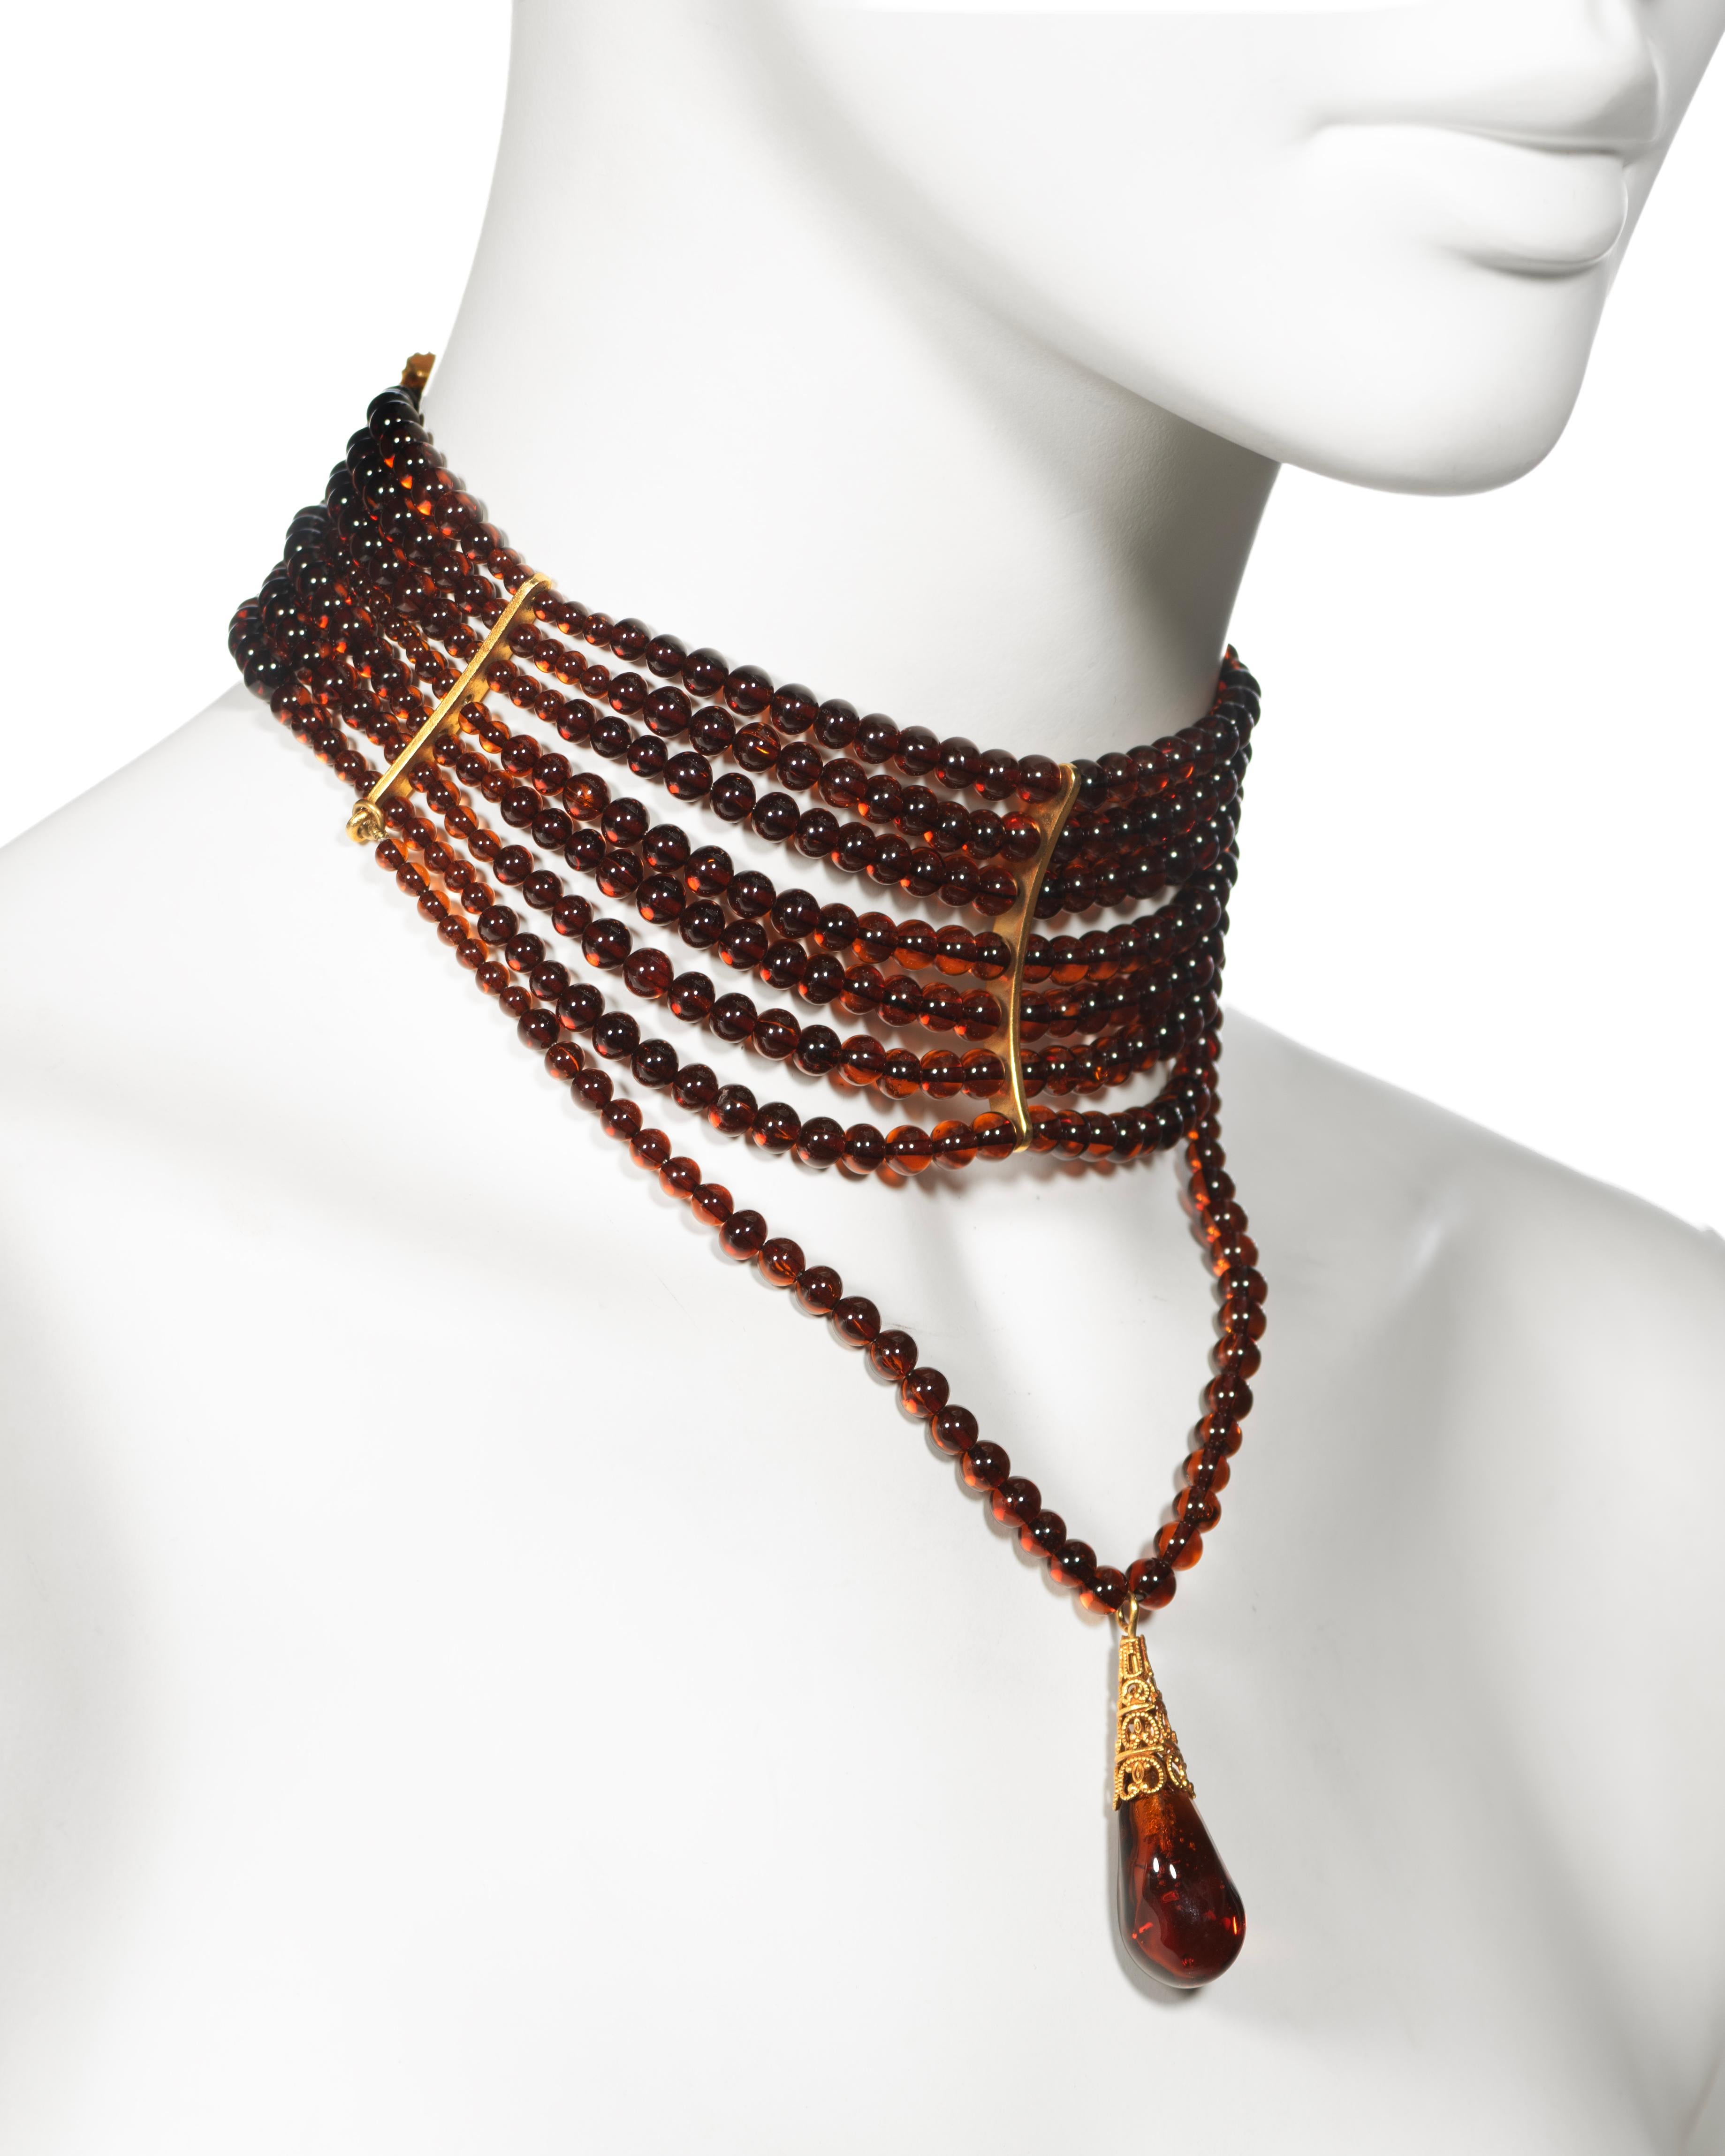 Christian Dior by John Galliano Amber Glass Bead Choker Necklace, c. 1998 For Sale 1